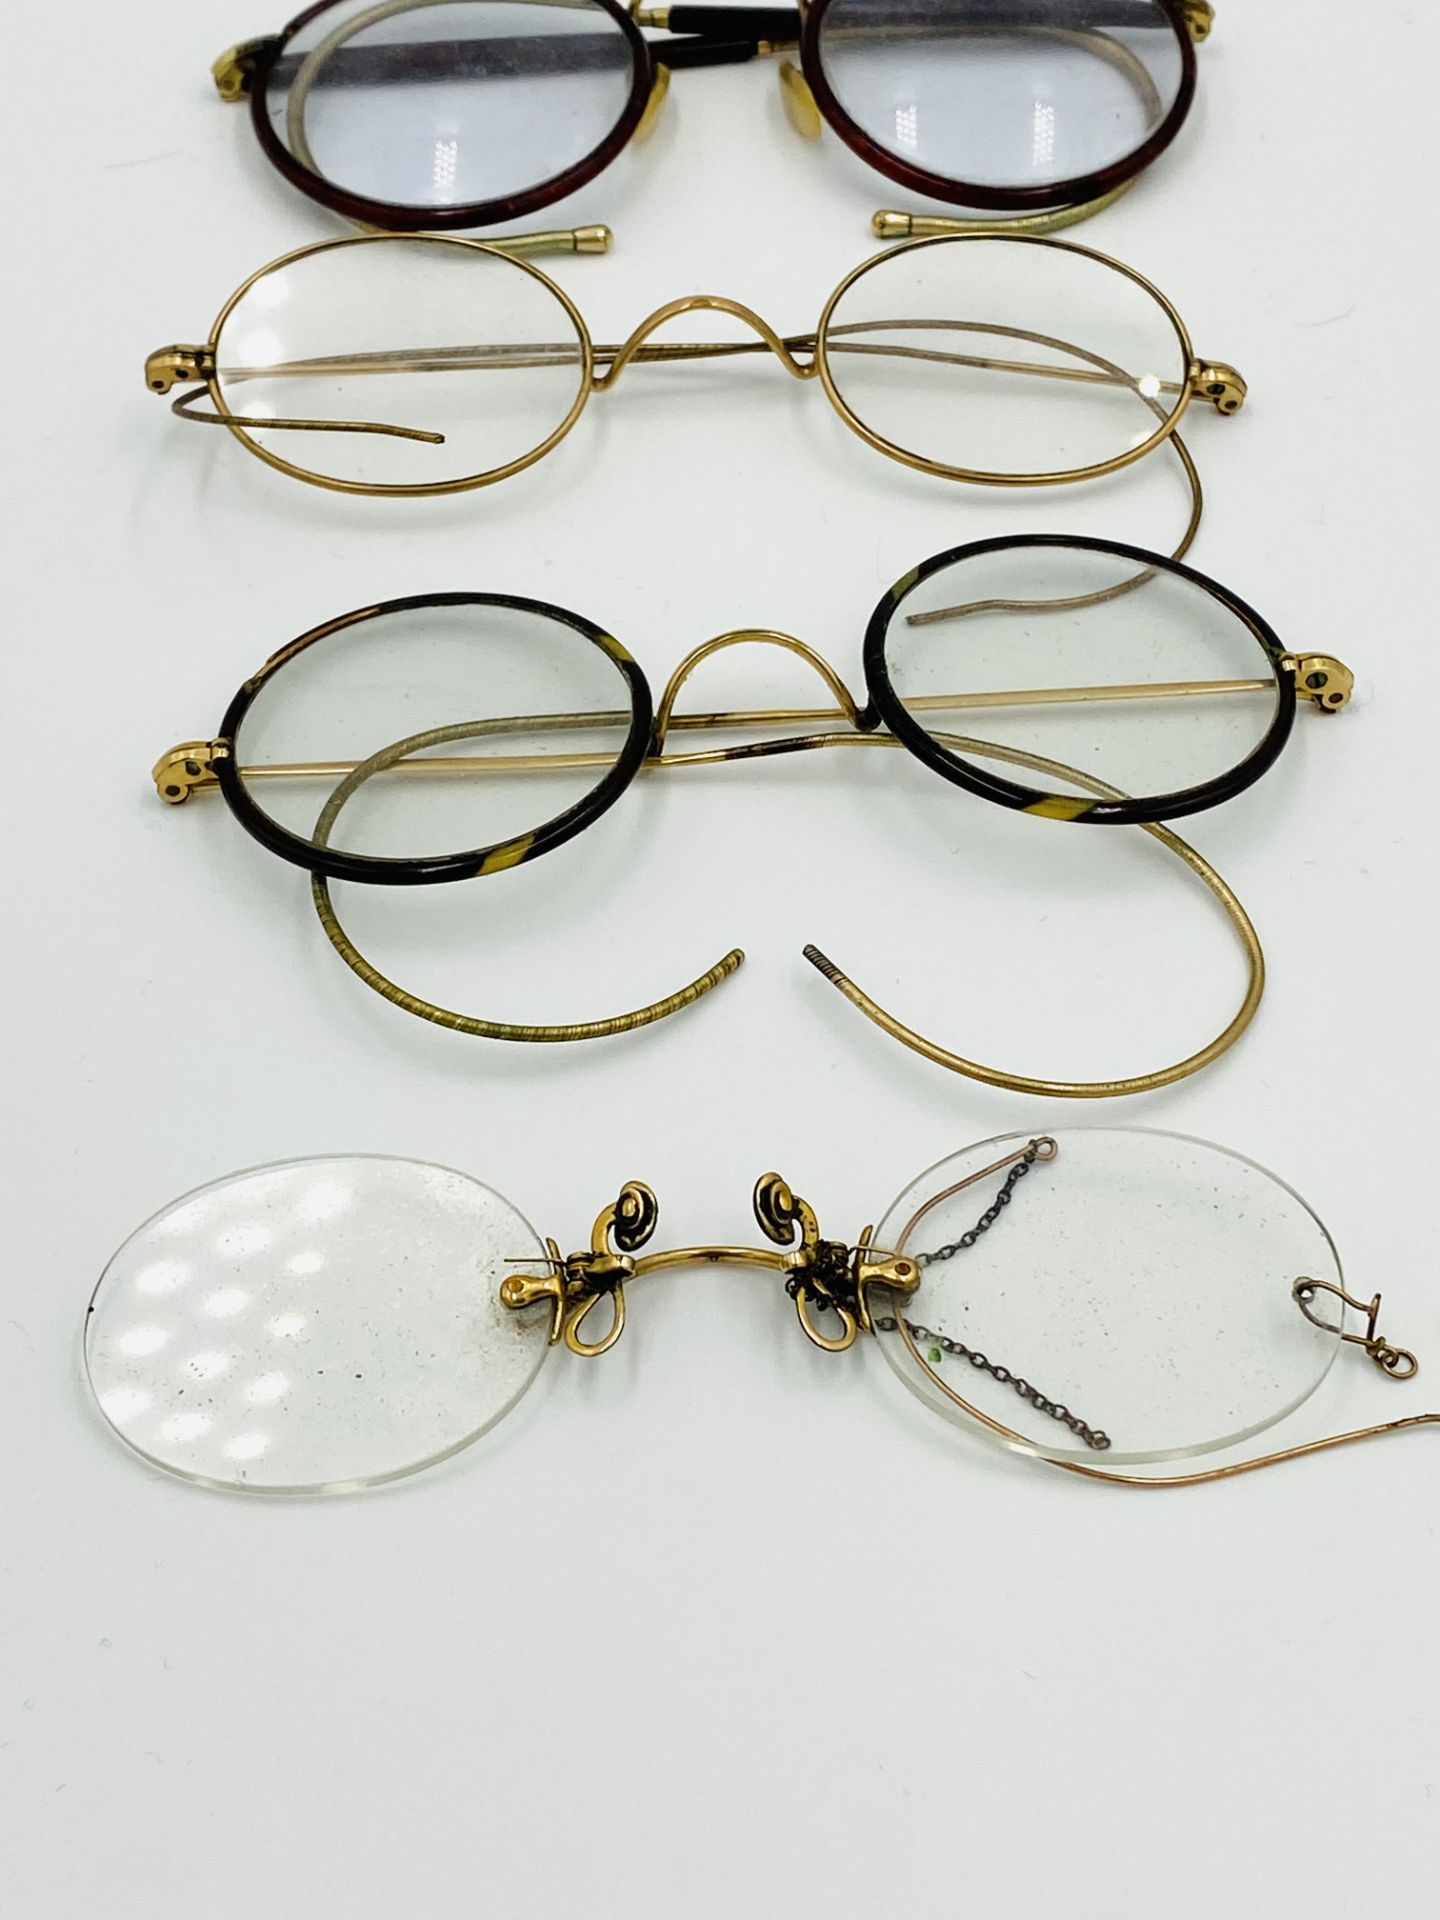 Three pairs of spectacles and a pair of prince nez - Image 3 of 3